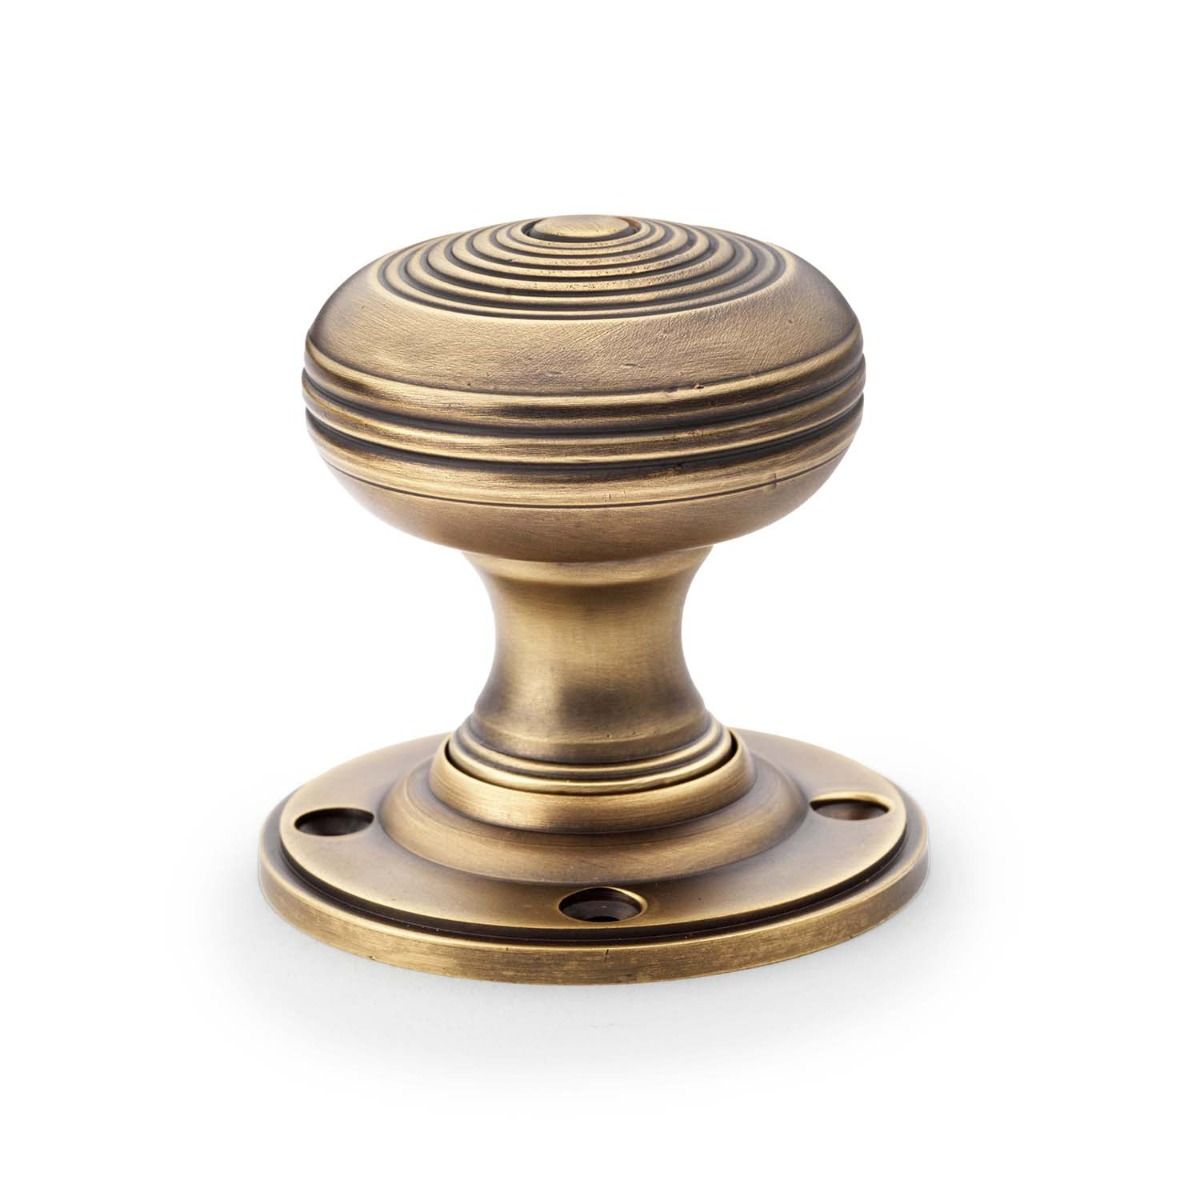 Alexander And Wilks Christoph Mortice Knob 50mm Dia. Antique Brass AW303-50-AB